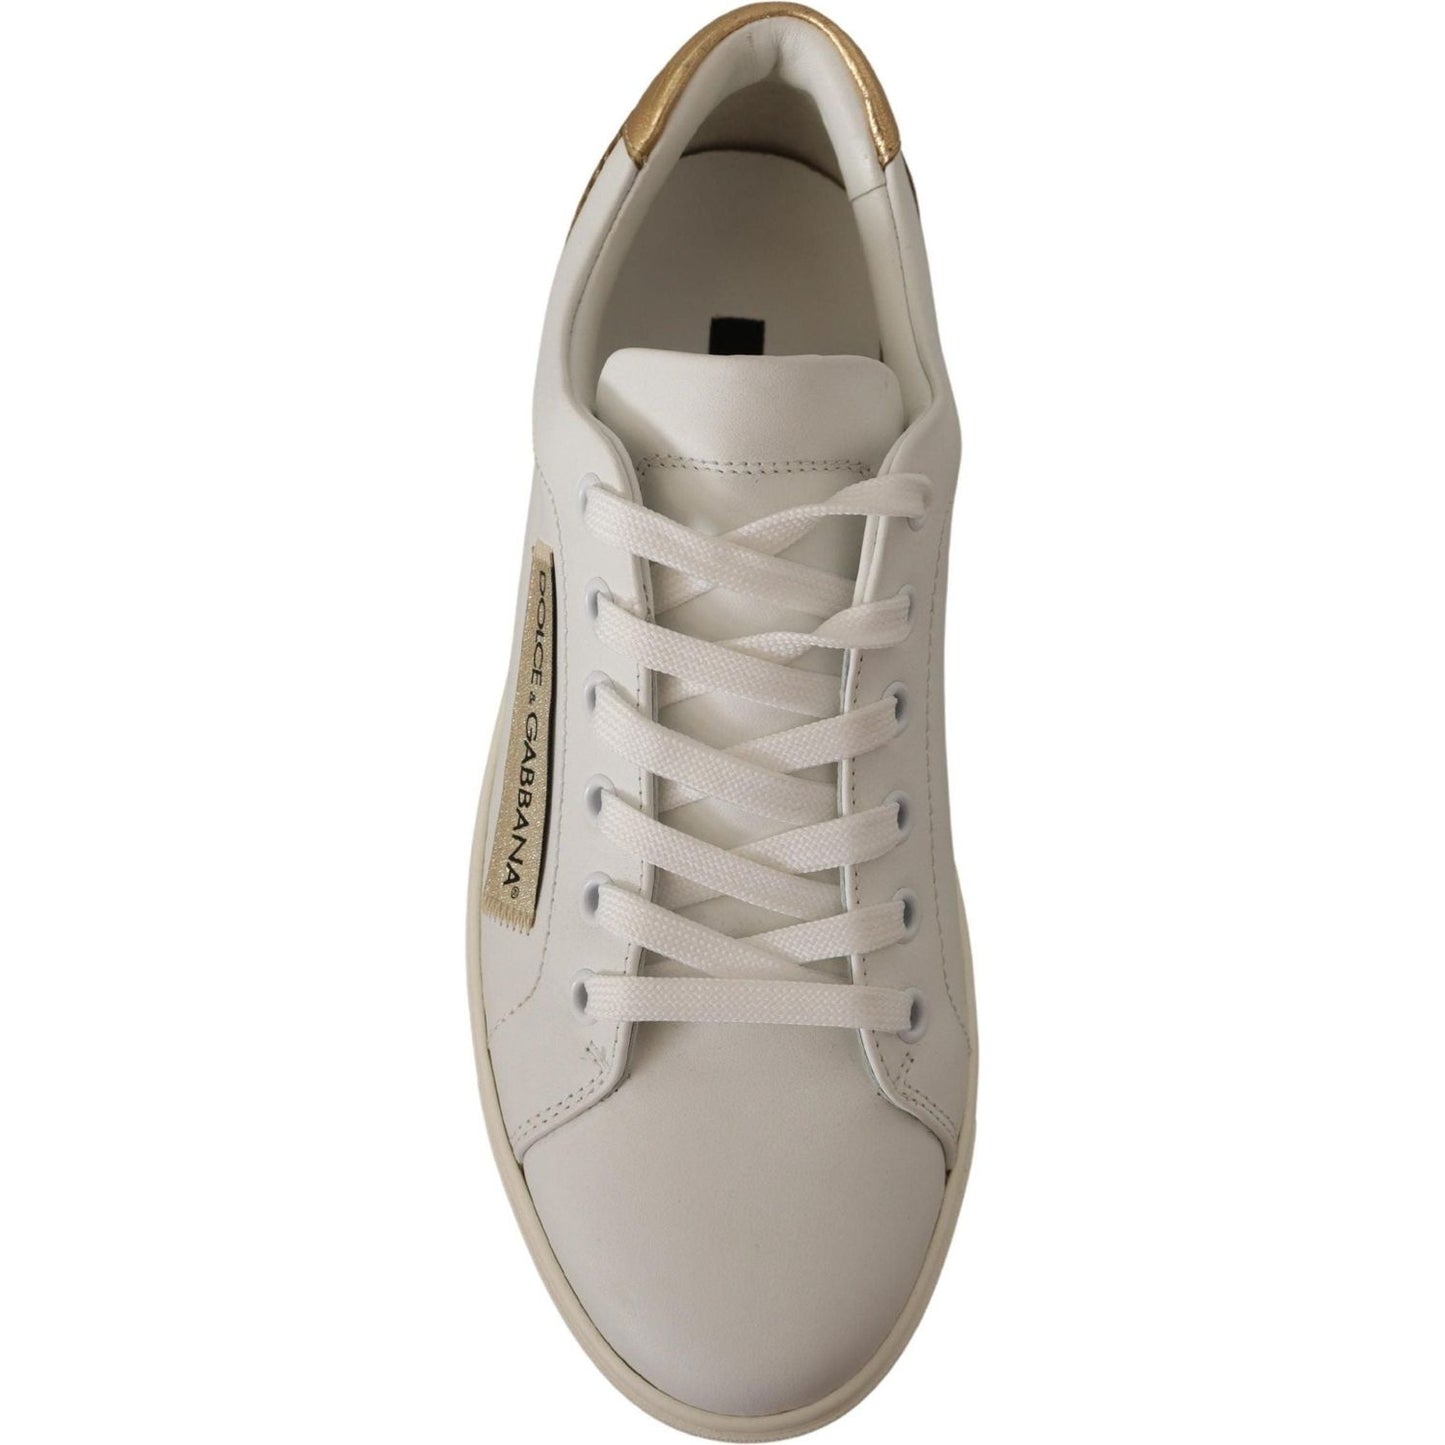 Dolce & Gabbana Elegant White Leather Sneakers with Gold Accents white-gold-leather-low-top-sneakers